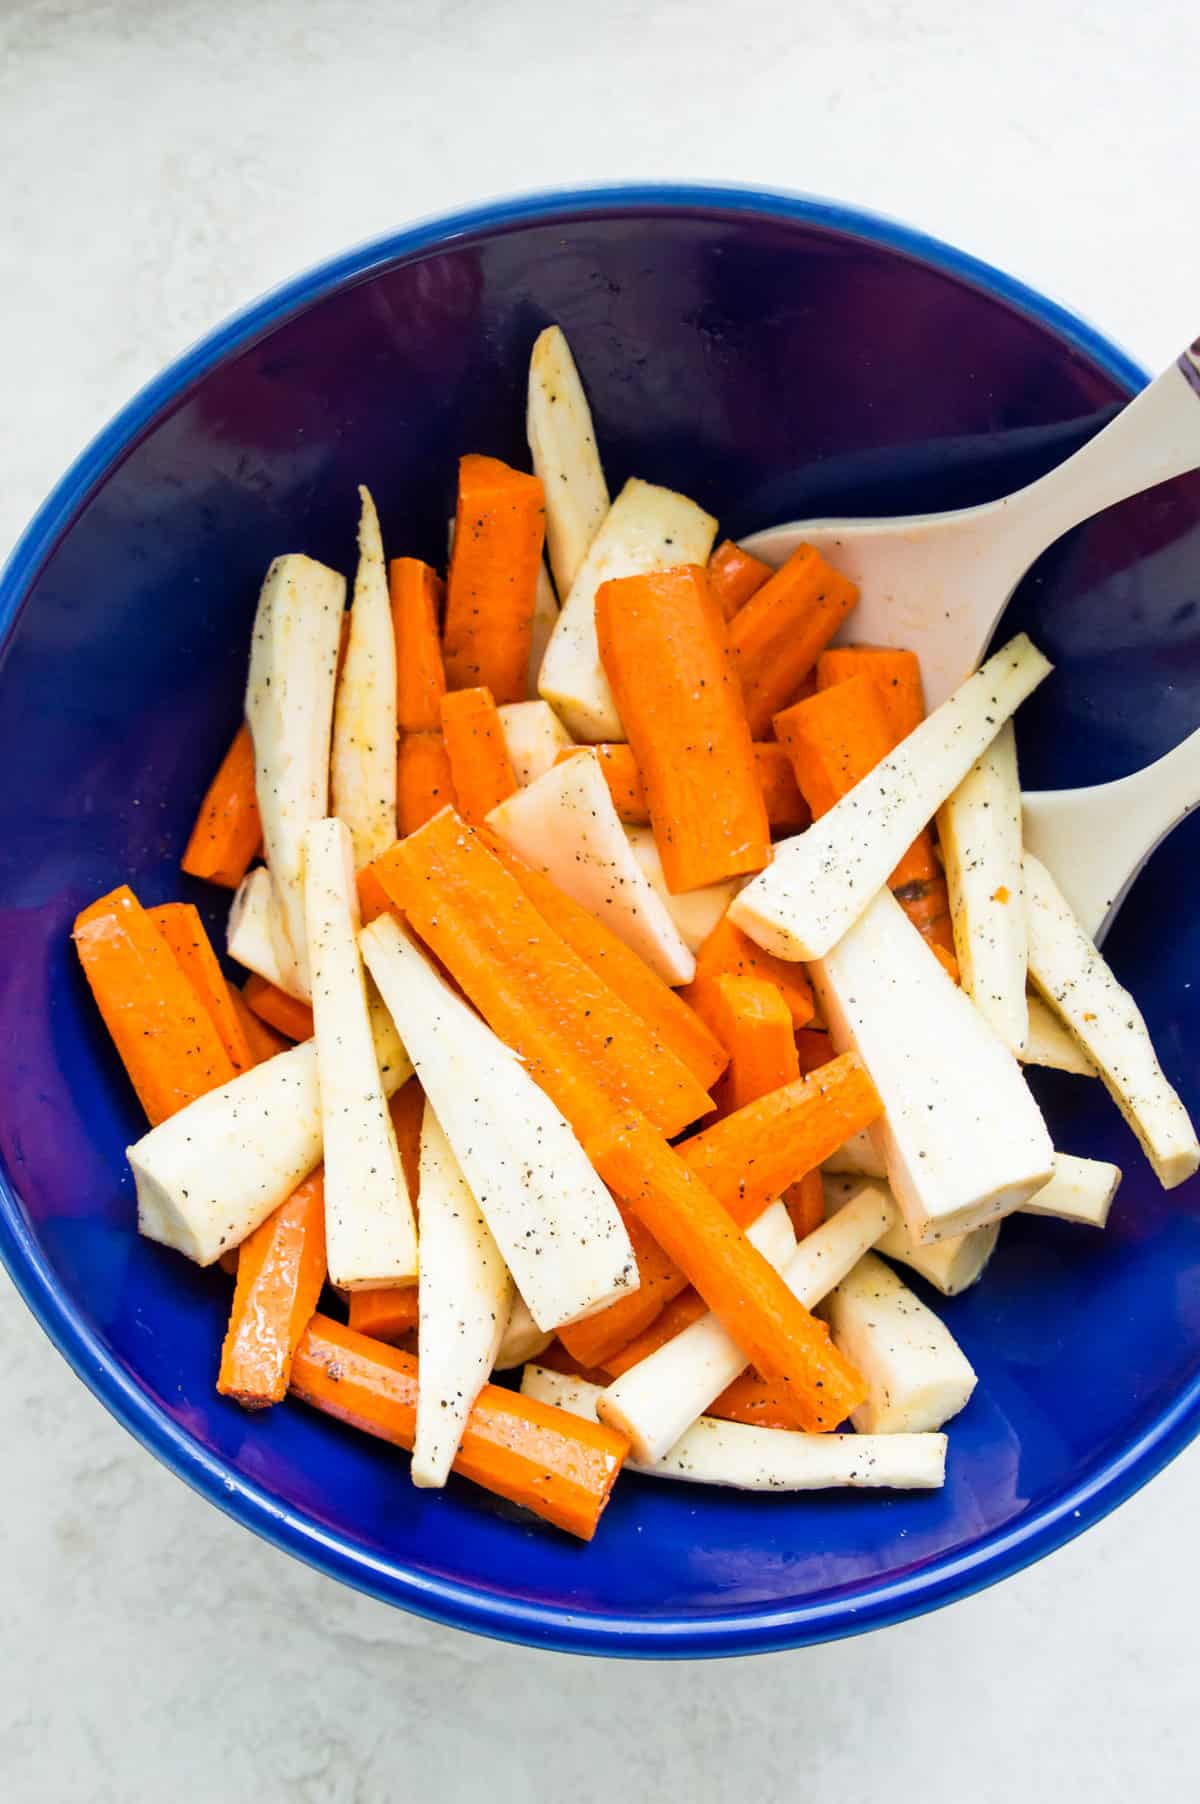 Cut up carrots and parsnips, in a large bowl. 